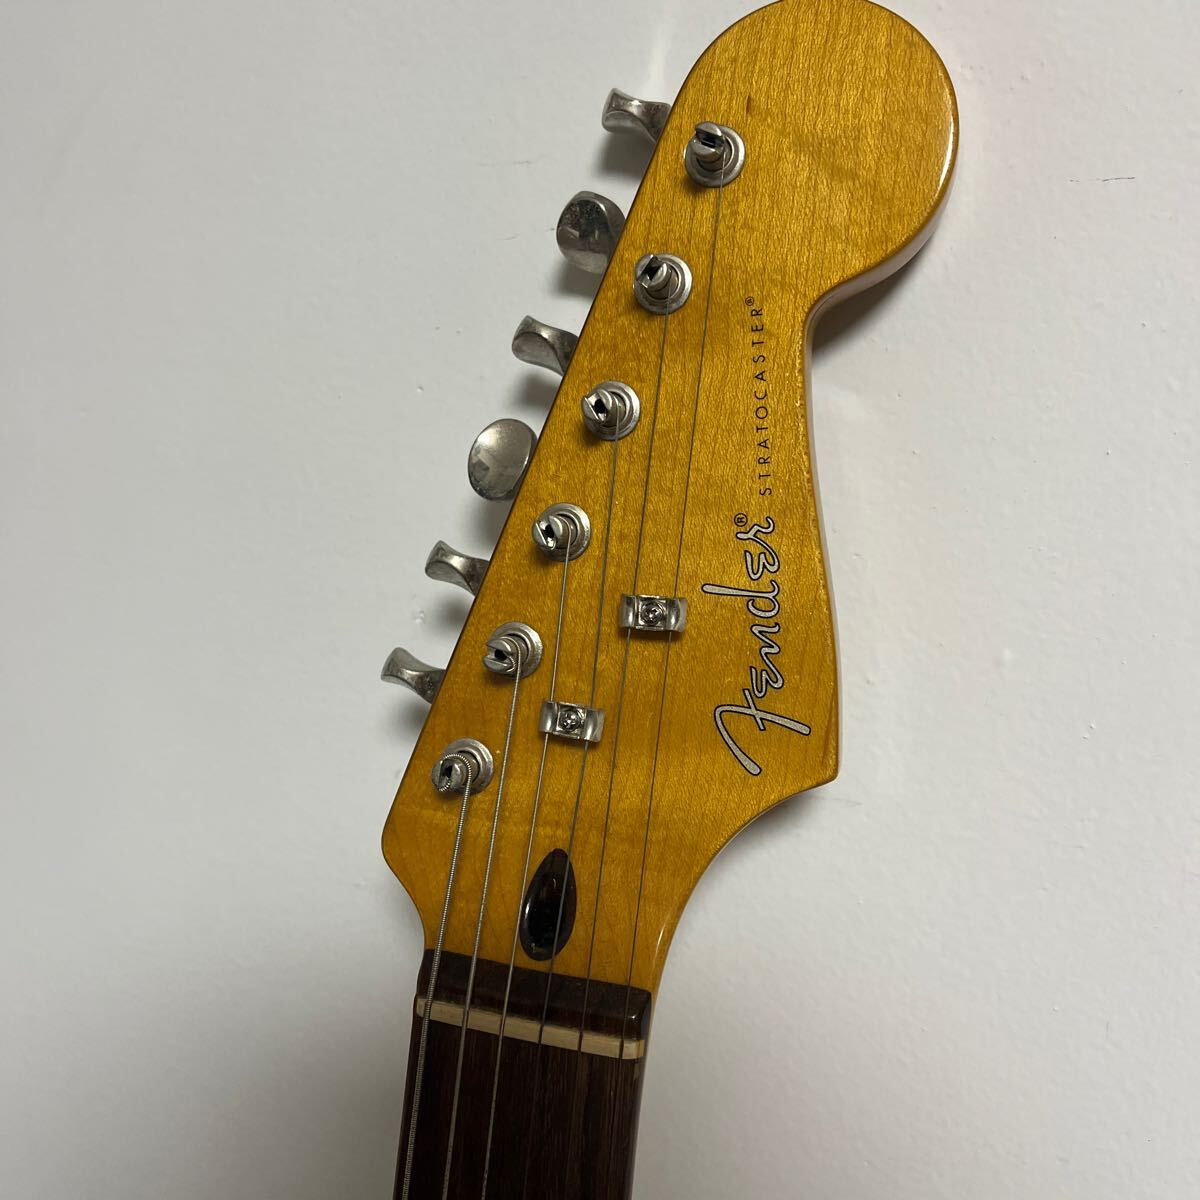 FENDER STRATOCASTER エレキギター crafted in China 